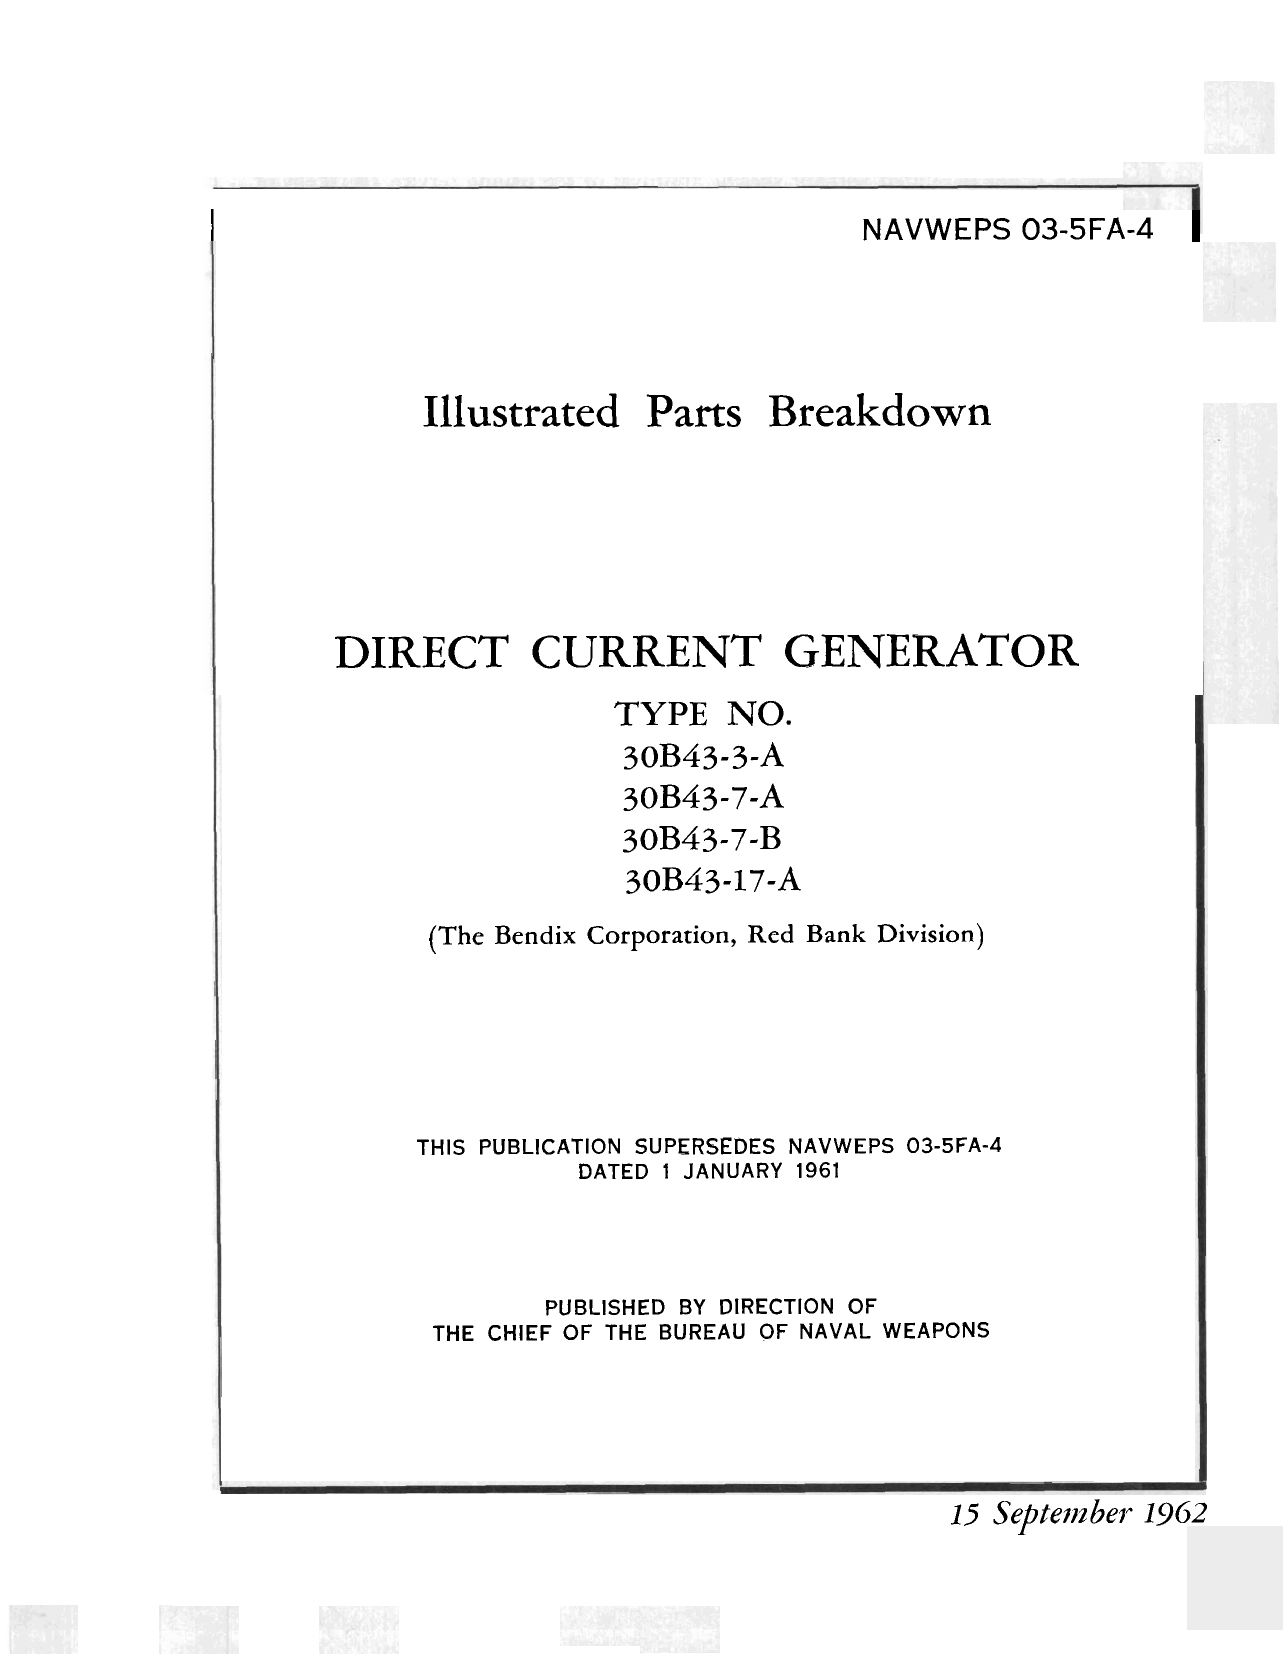 Sample page 1 from AirCorps Library document: Illustrated Parts Breakdown for Direct Current Generator - Types 30B43-3-A, 30B43-7-A, 30B43-7-B, 30B43-17-A